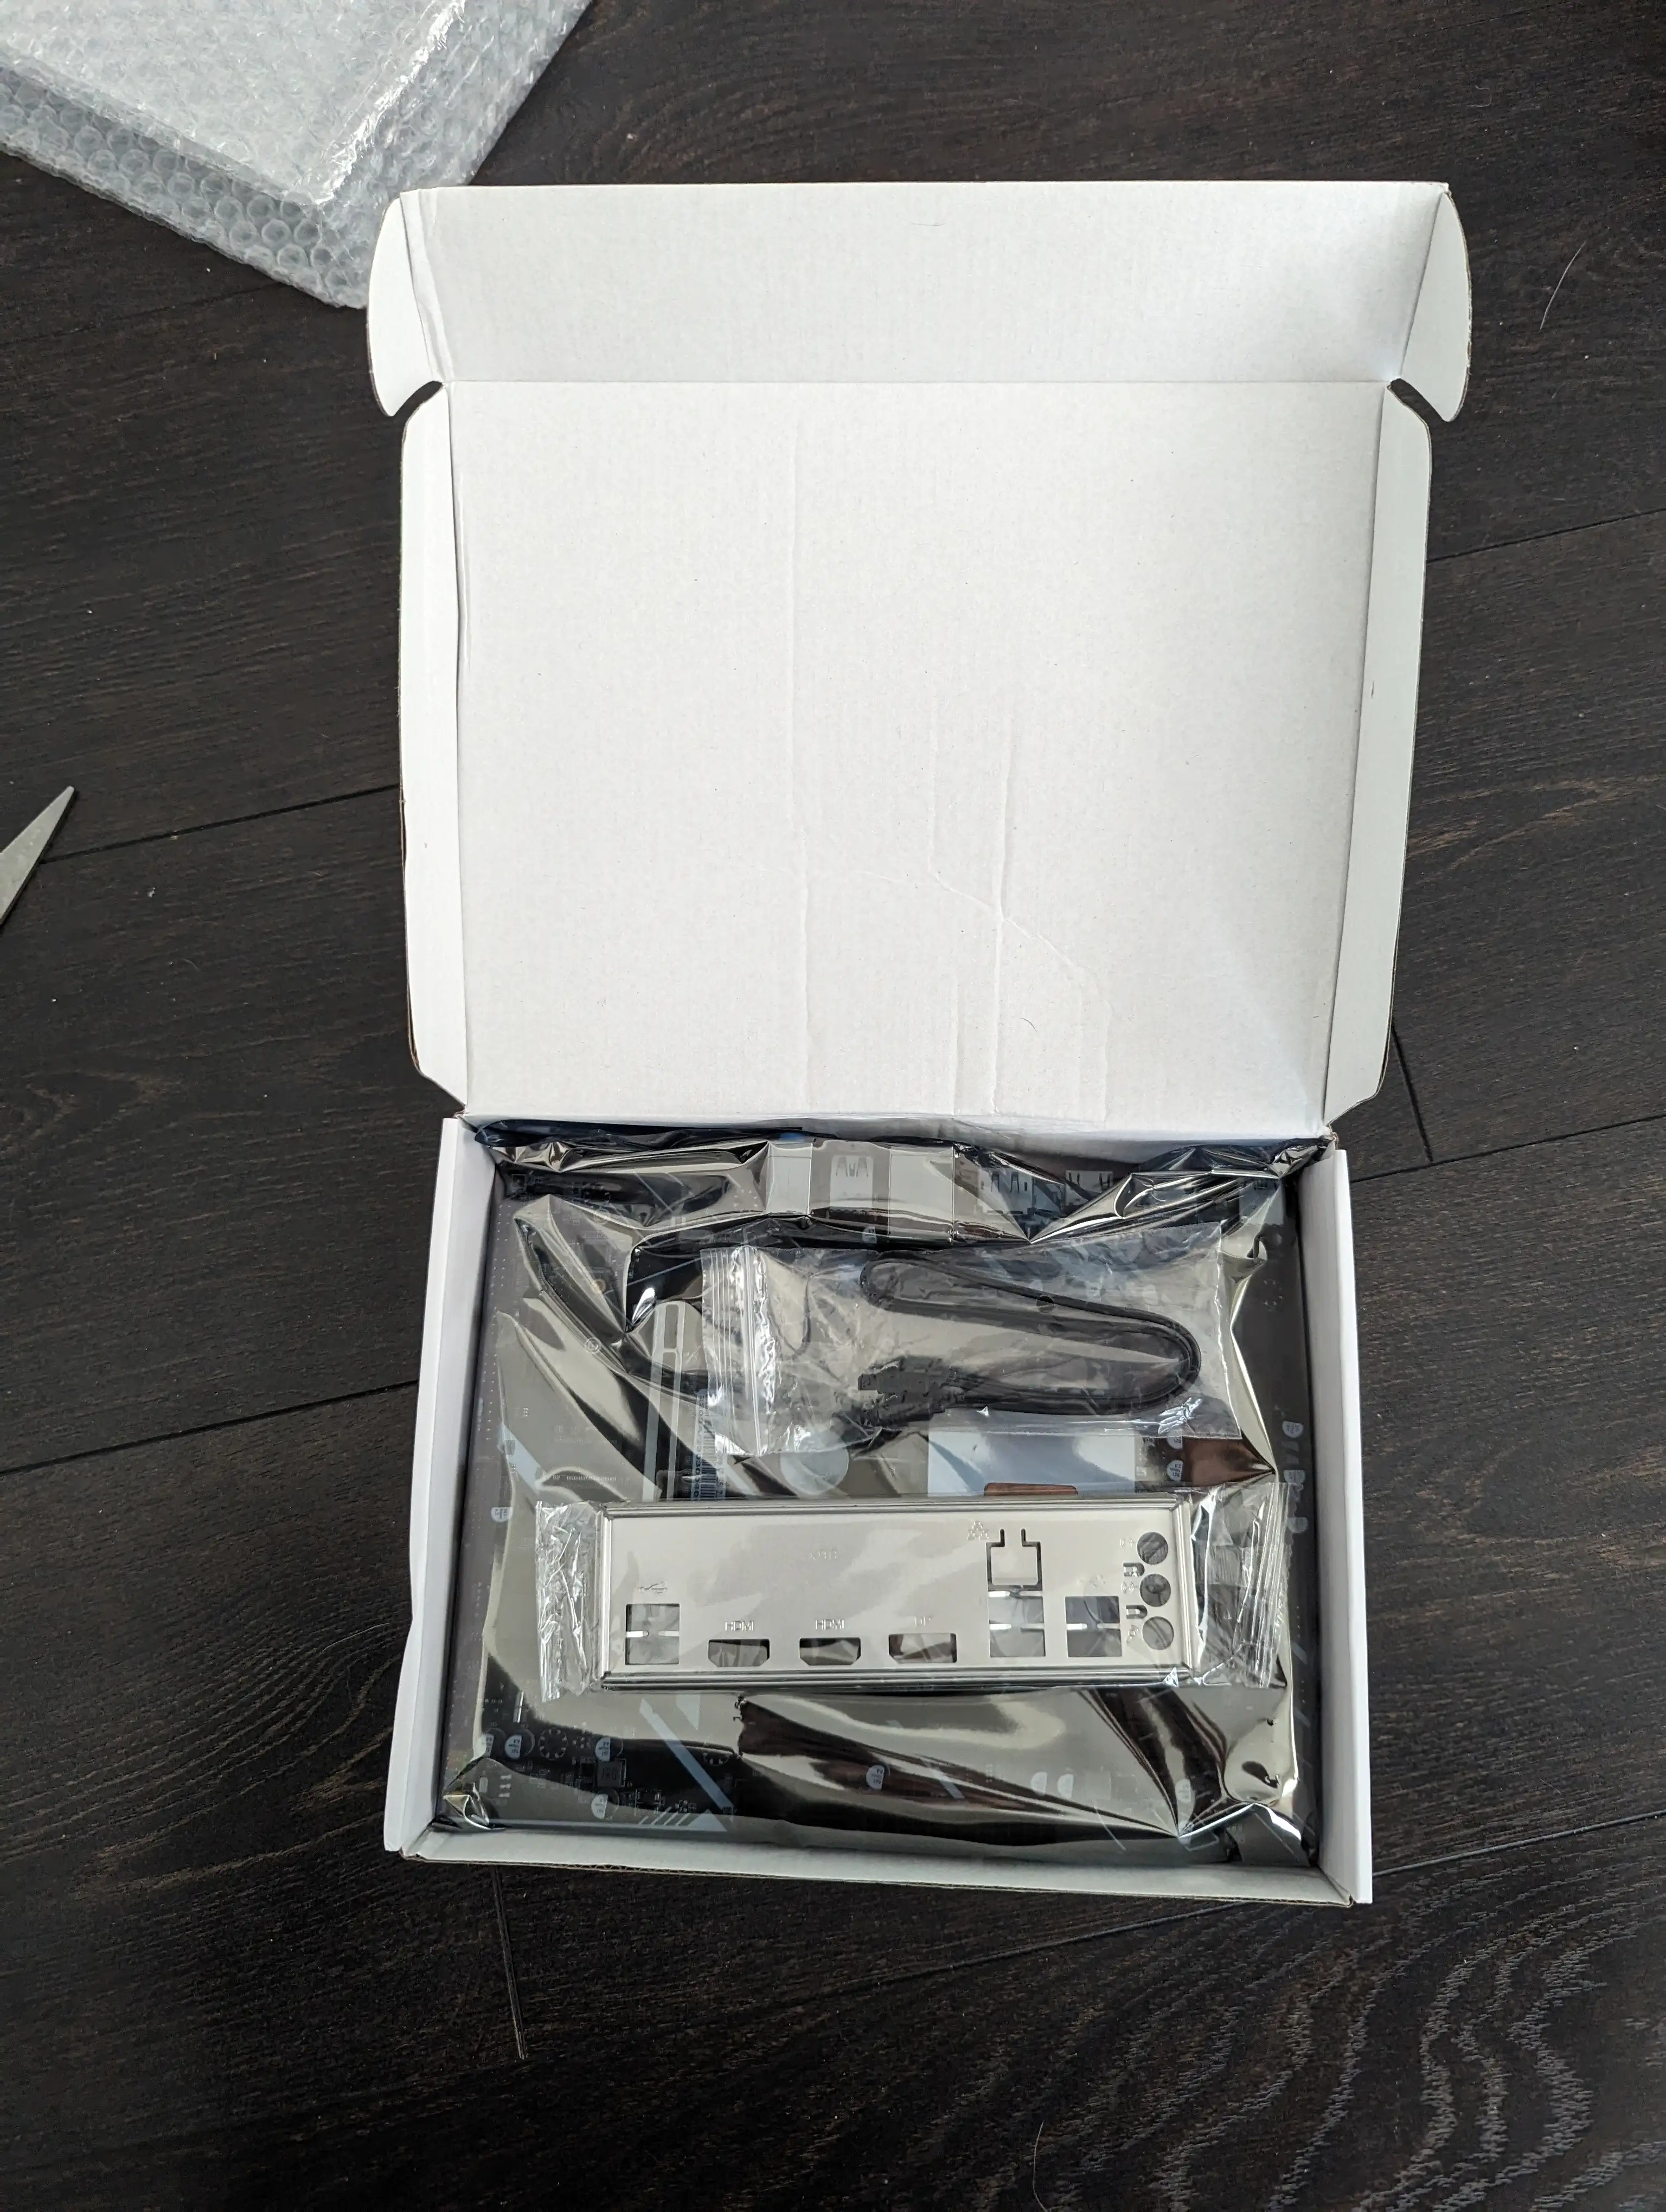 A photo showing the inside of an Erying Motherboard box, showing a motherboard packaged in an antistatic bag, a very basic looking IO shield, and a black SATA cable.